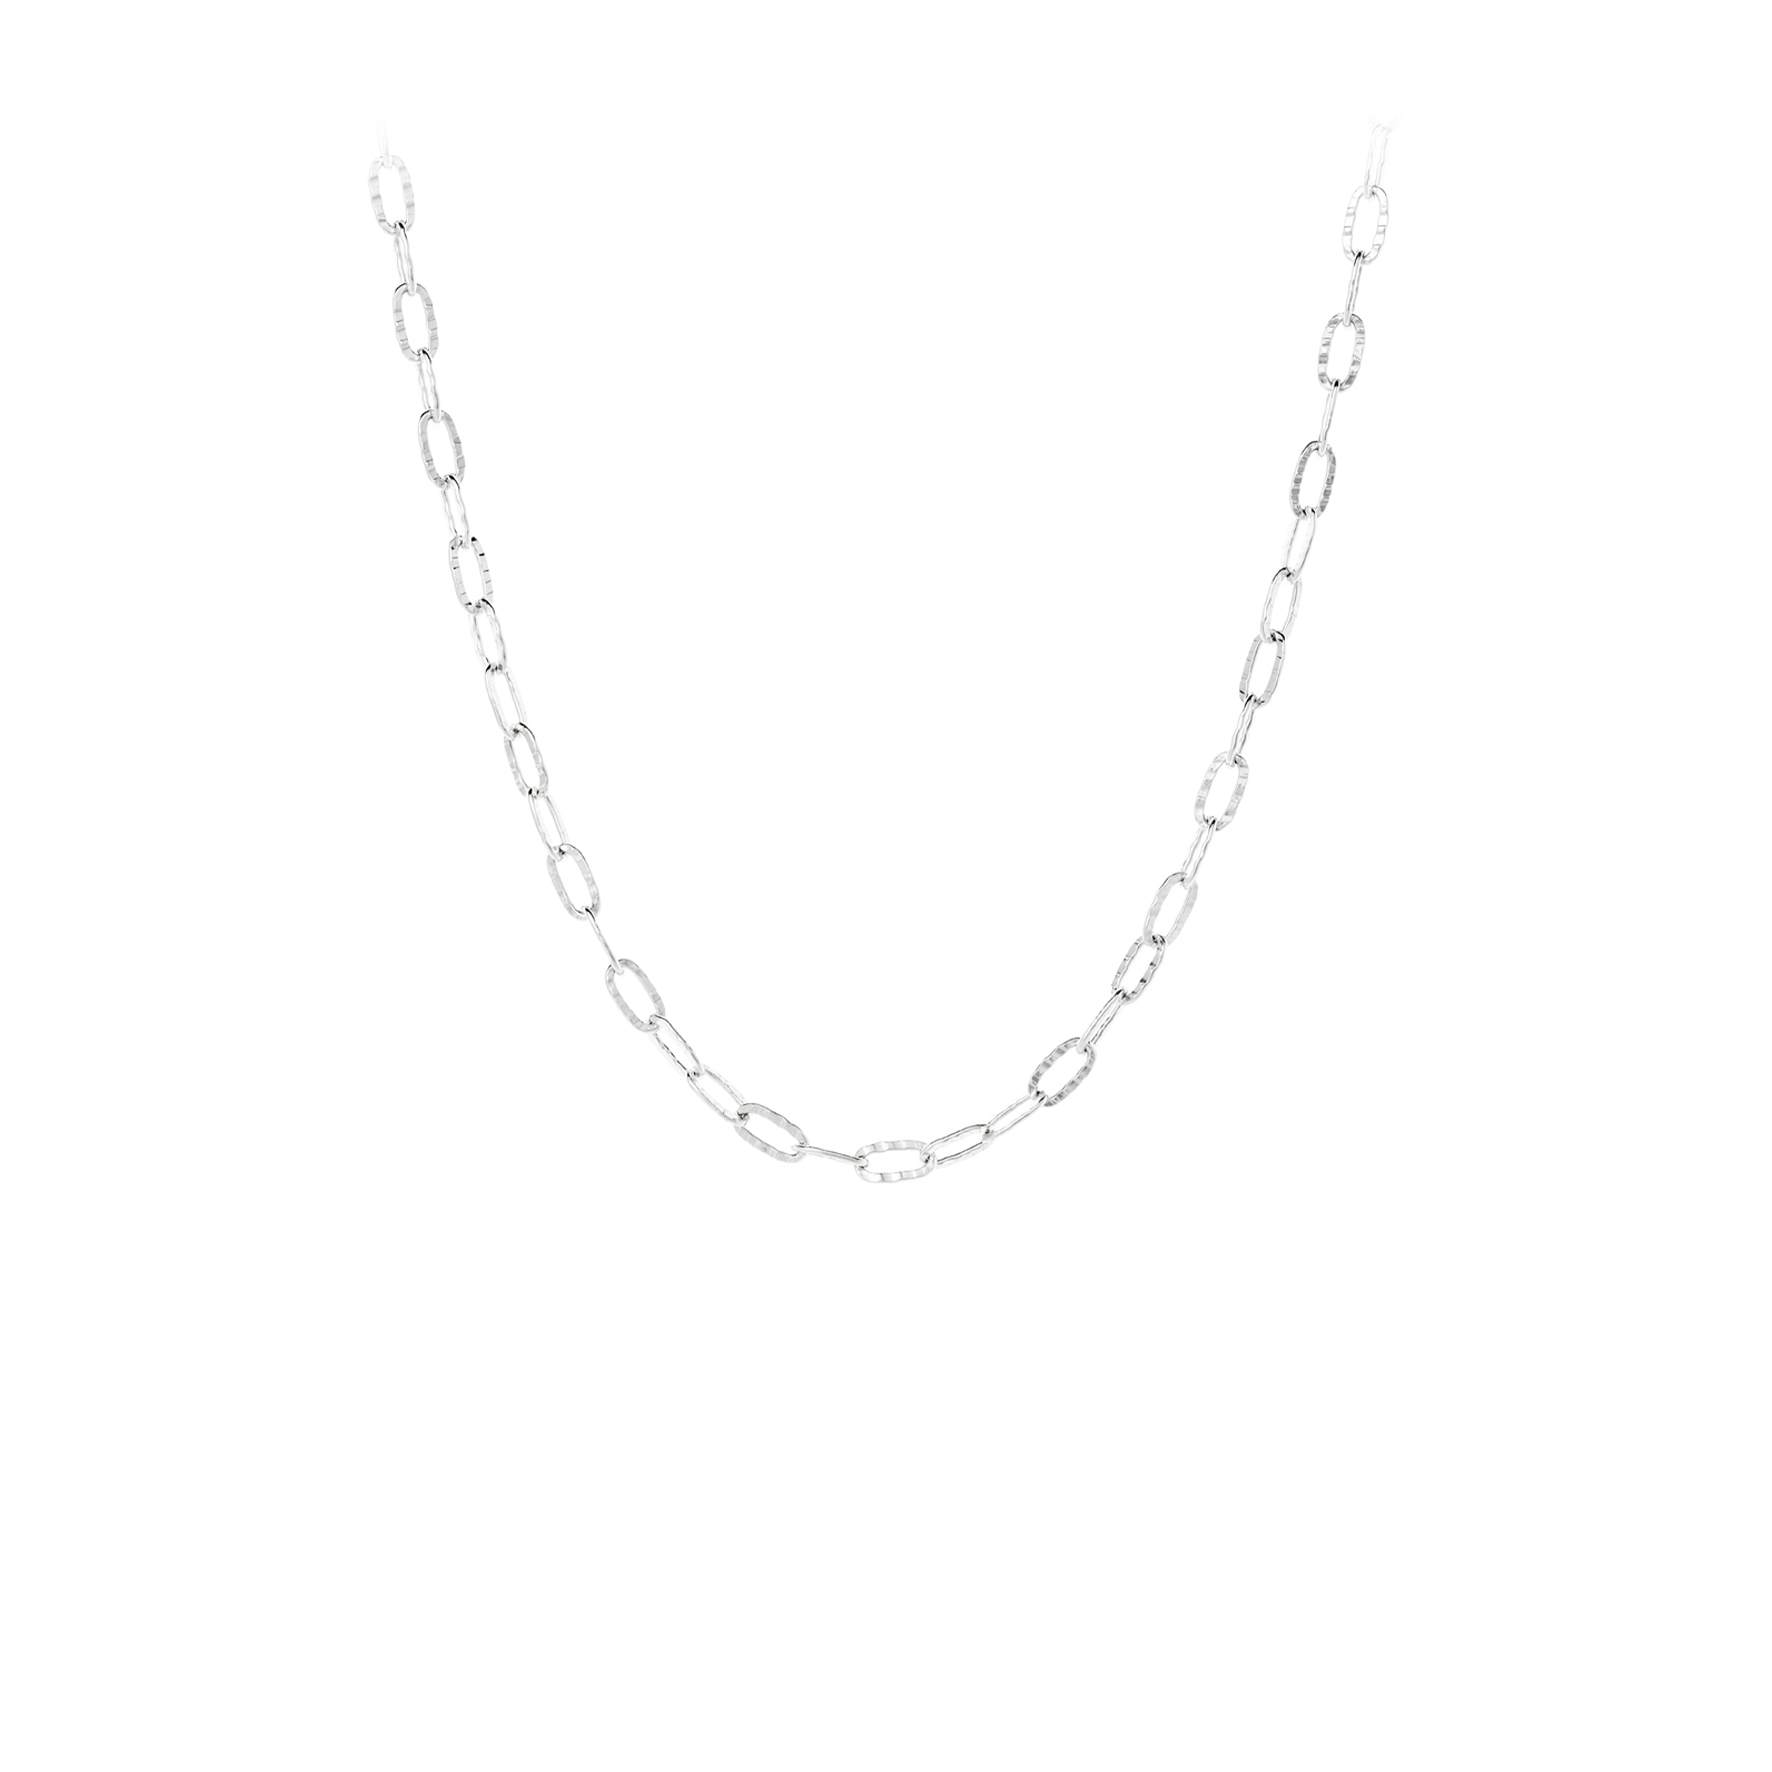 Alba Necklace from Pernille Corydon in Silver Sterling 925